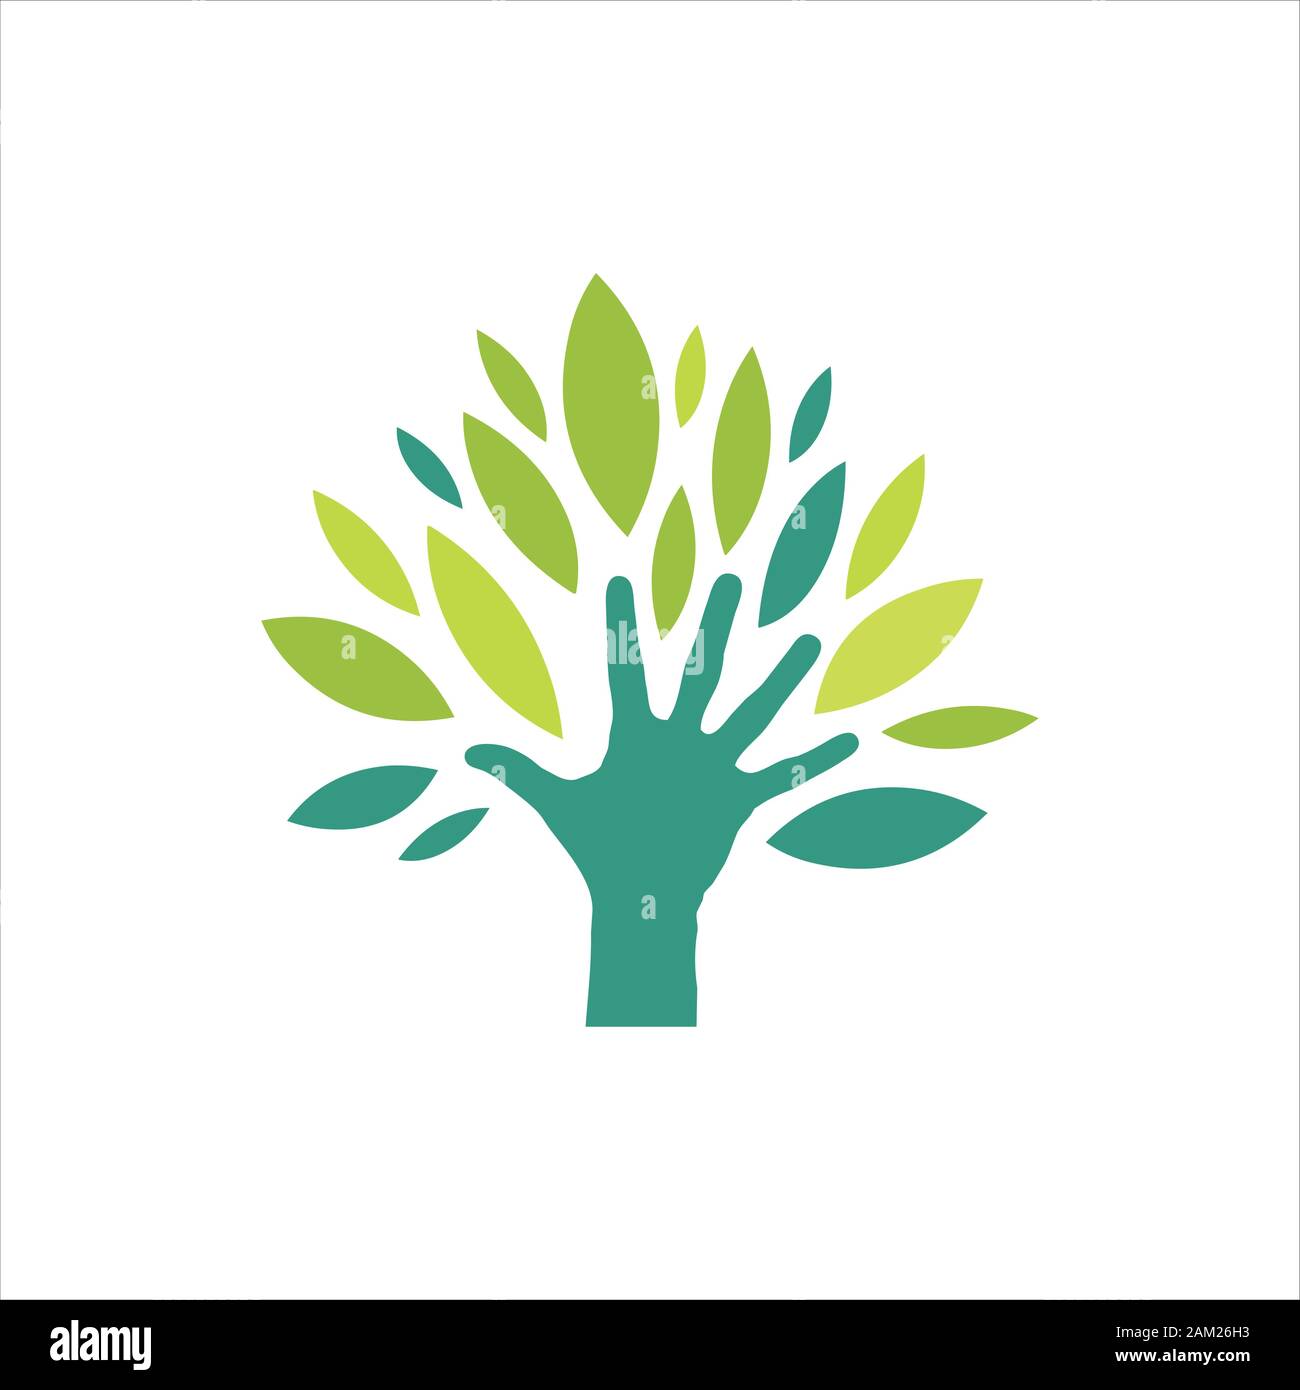 eco green hand logo vector design people who protect nature concept inspiration Stock Vector